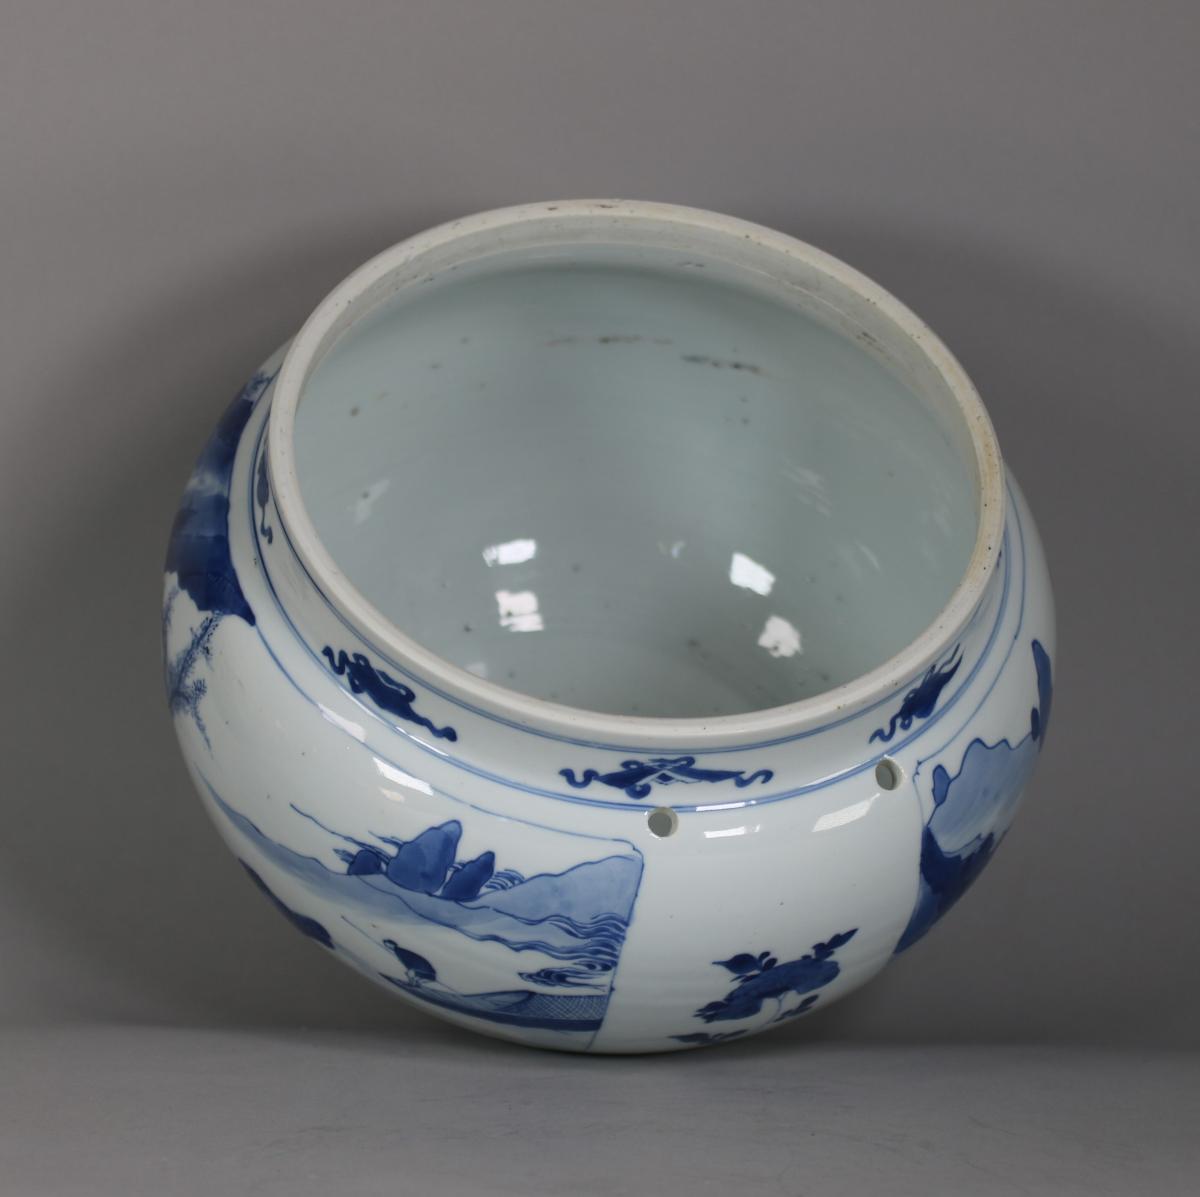 rim and interior of Kangxi blue and white vessel